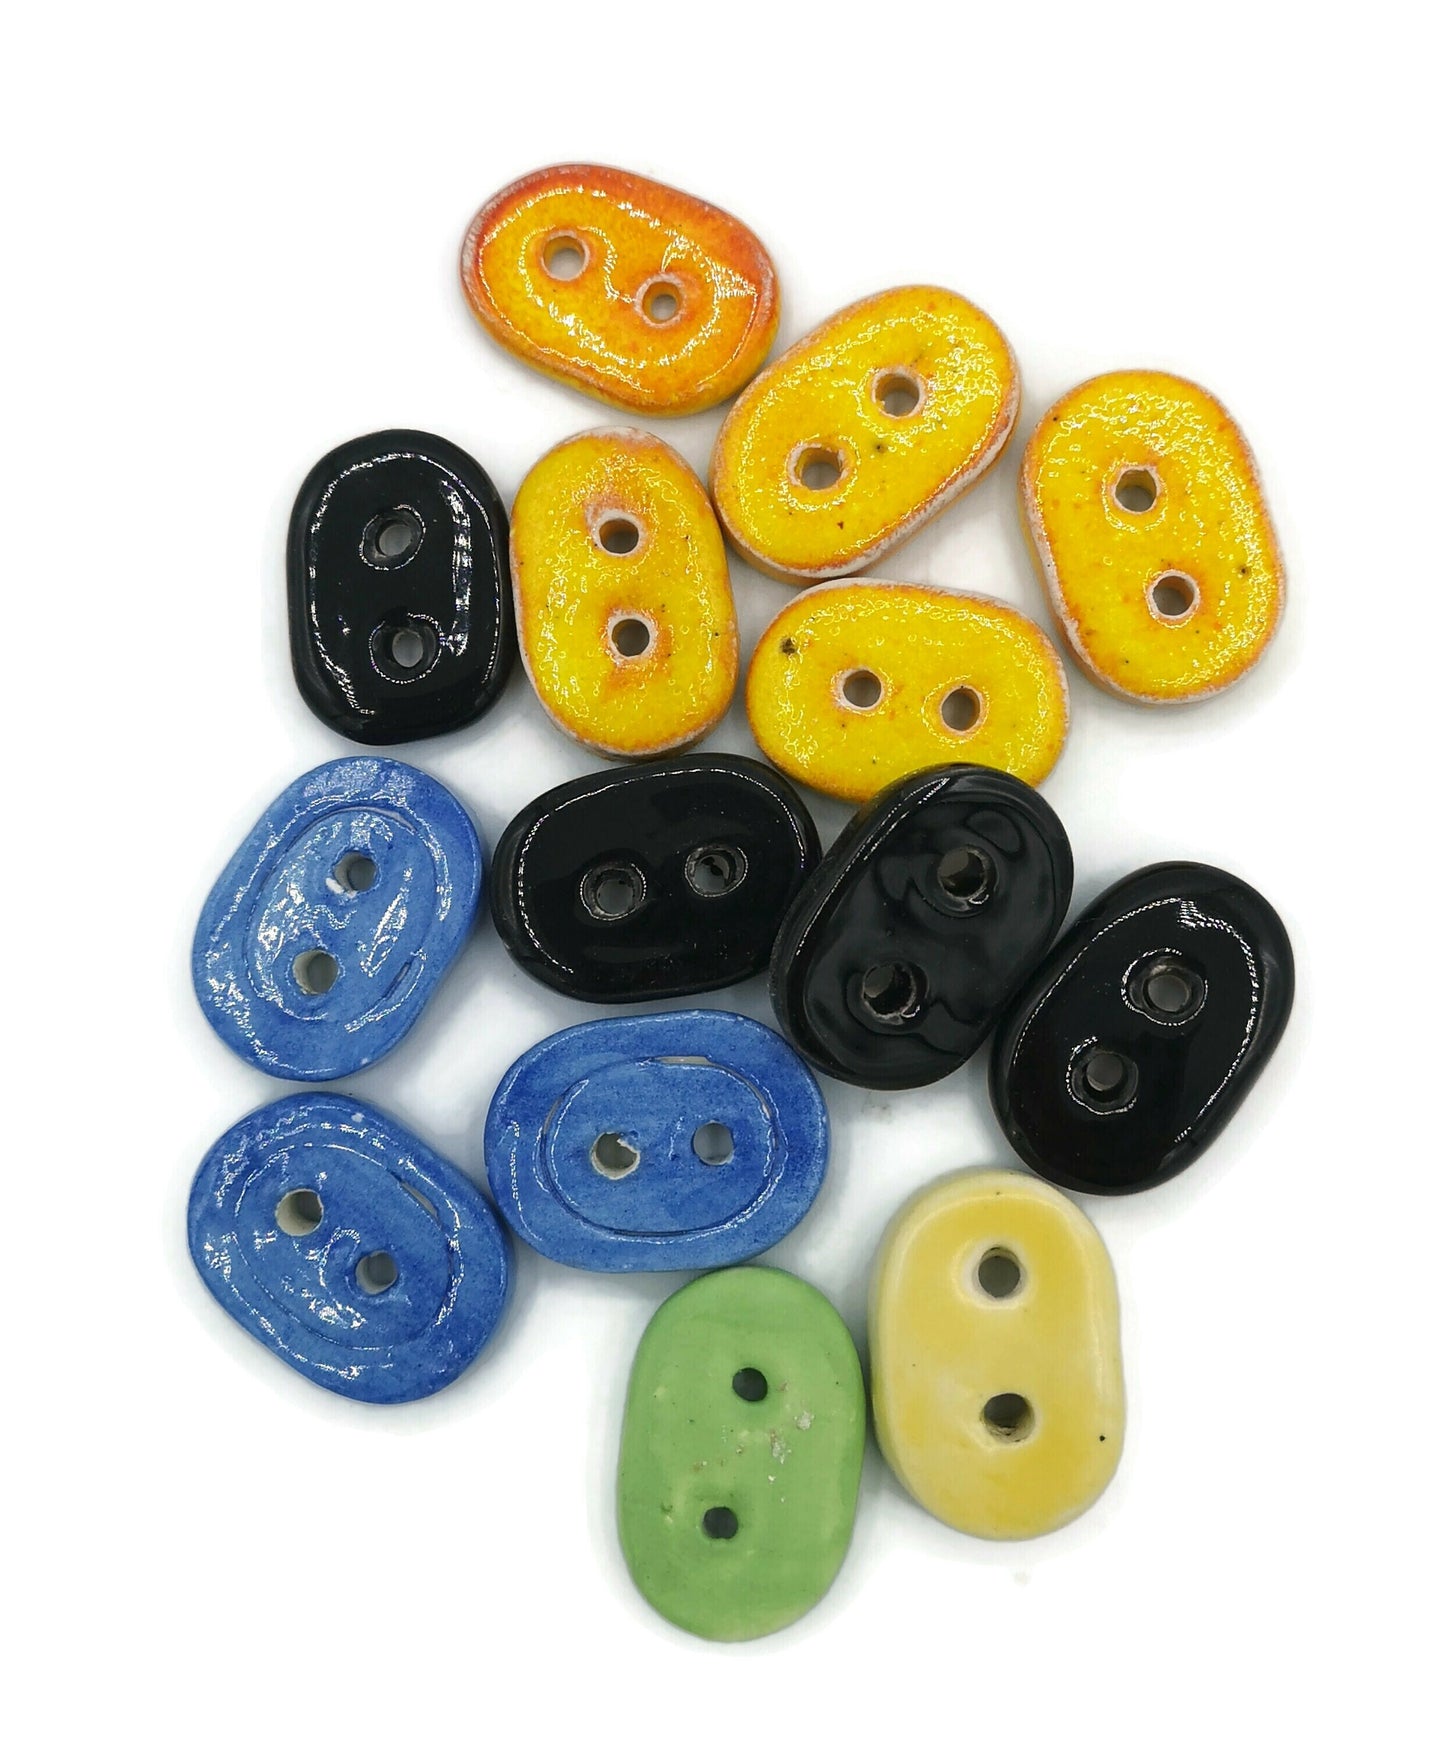 Set Of 14 Unique Sewing Buttons, Elegant Upholstery Buttons, Sewing Supplies And Notions For Crafts Cute Lot For Jewelry Making - Ceramica Ana Rafael